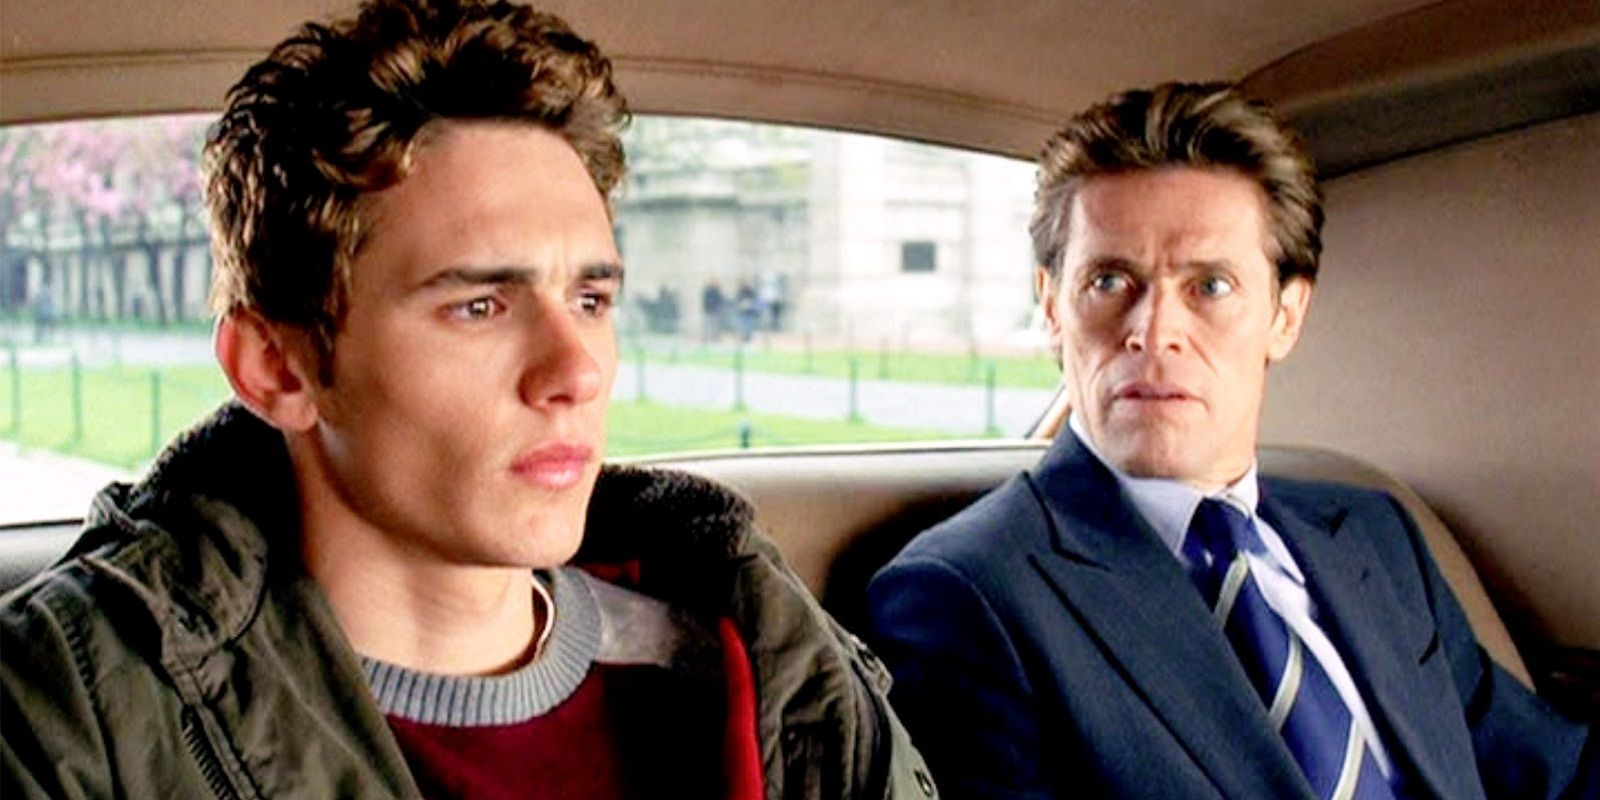 10 Best Movies With The Franco Brothers According To IMDb